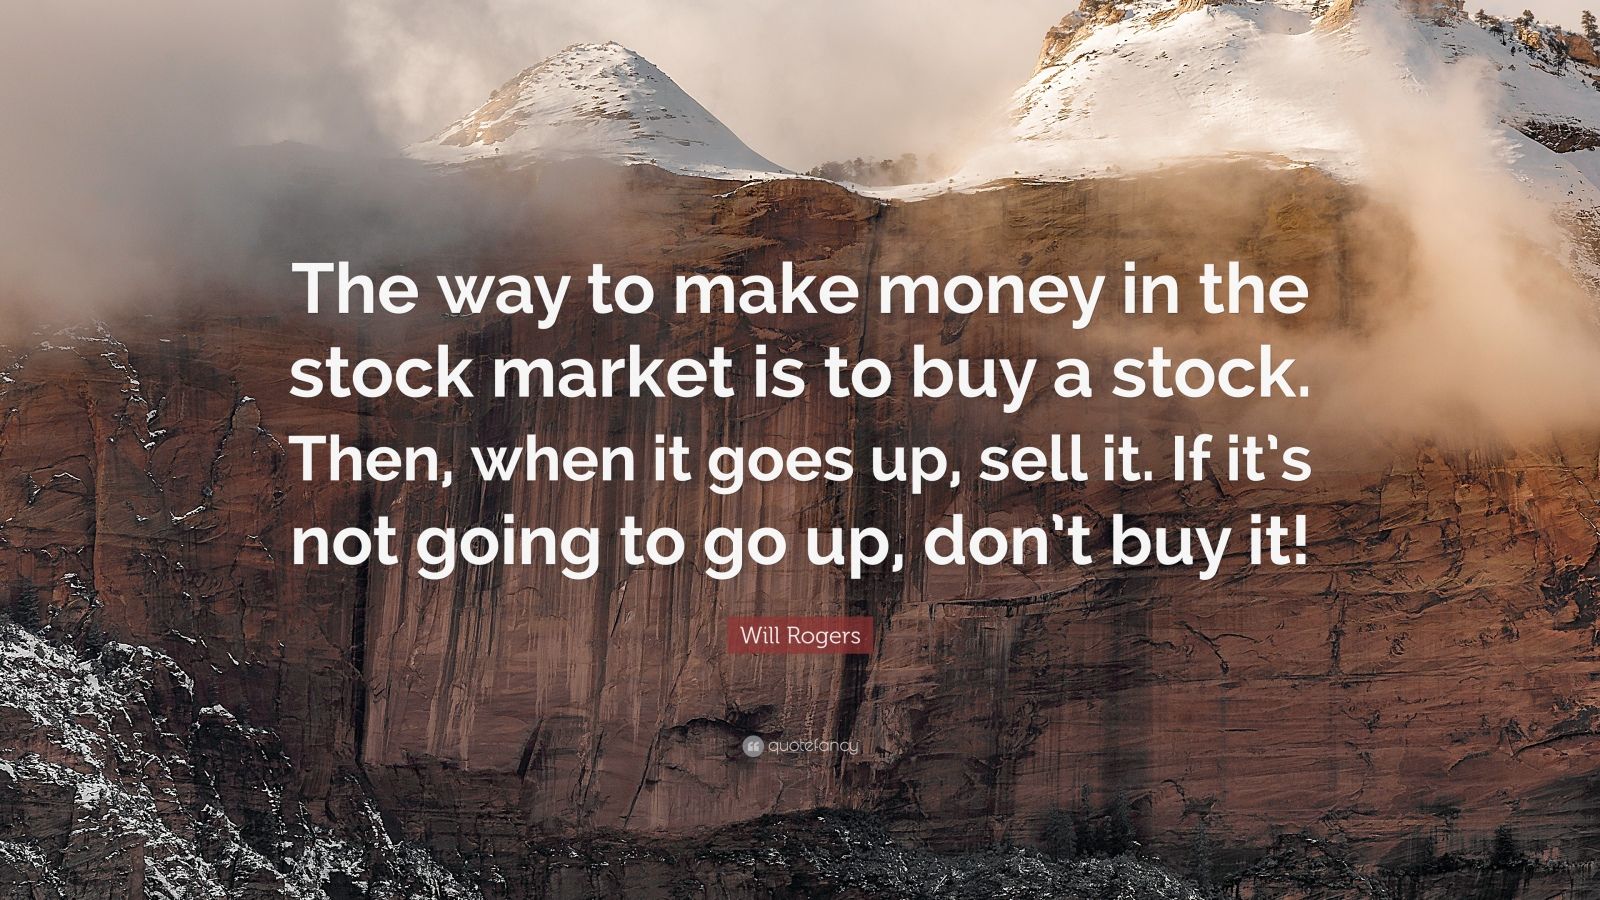 Will Rogers Quote: “The way to make money in the stock market is to buy a stock. Then, when it goes up, sell it. If it's not going to go up, .”